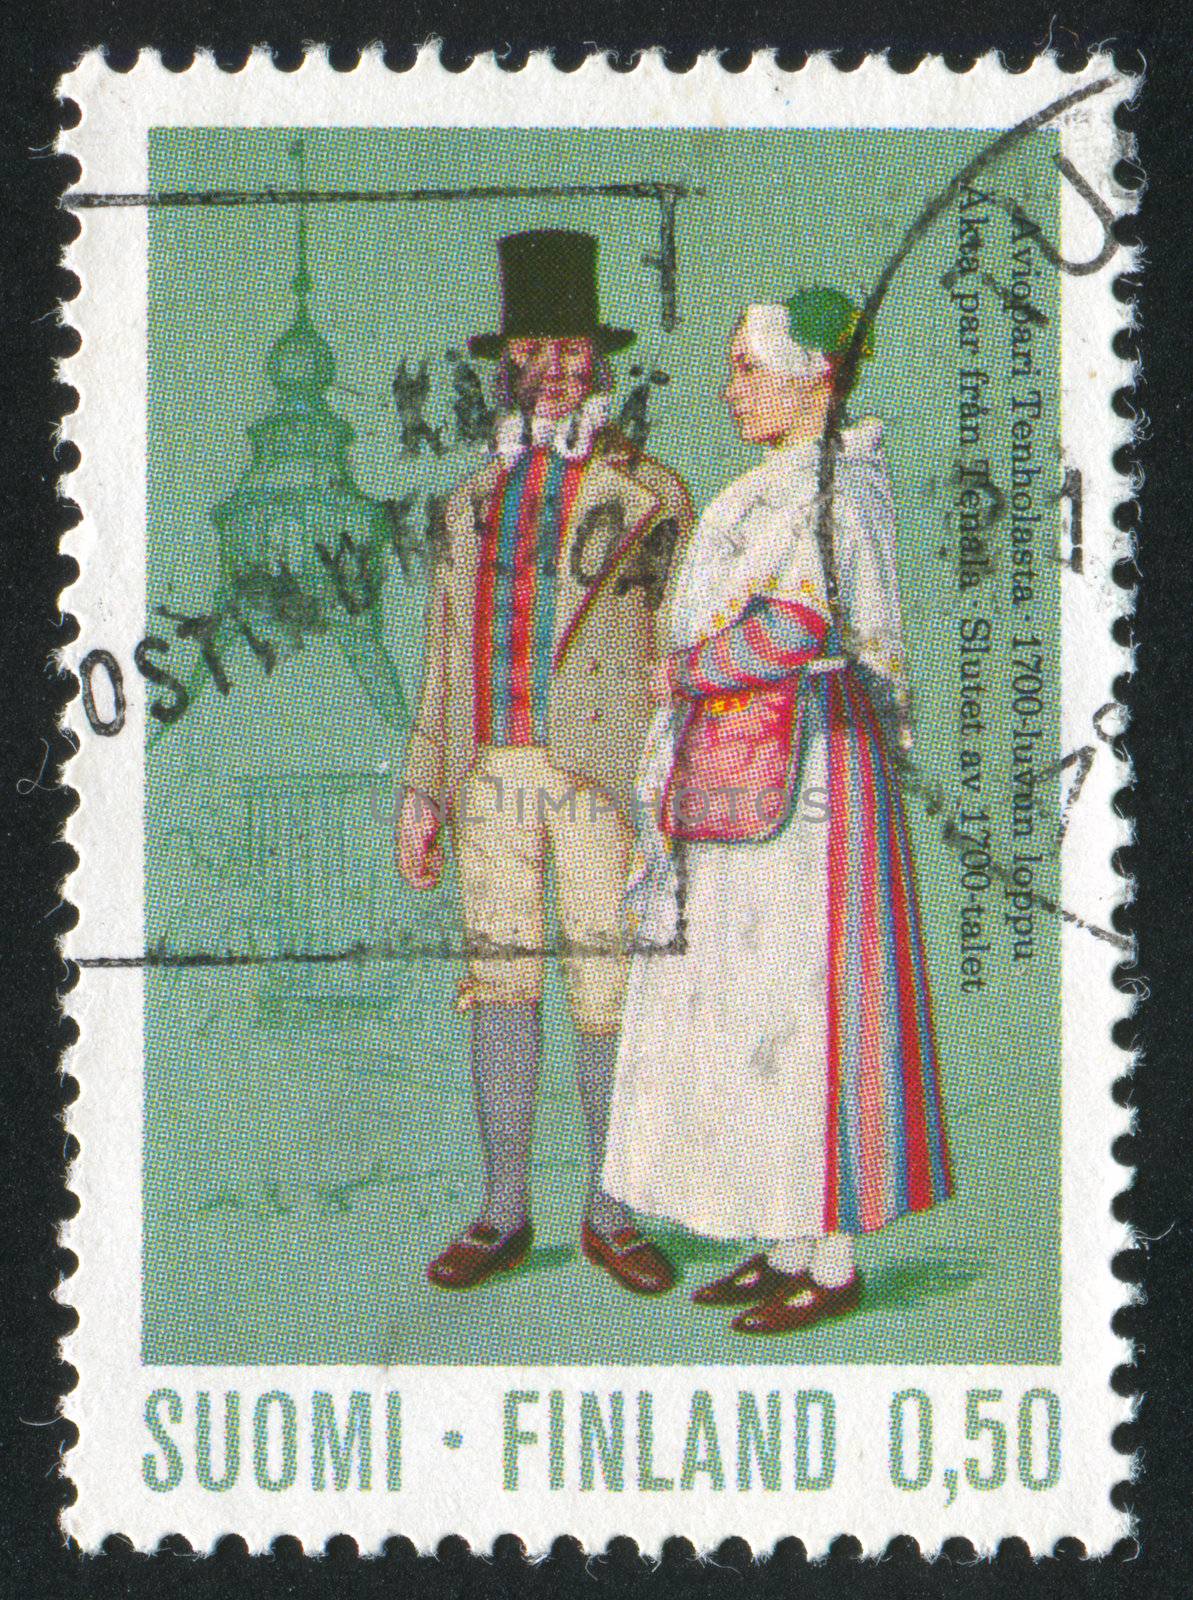 FINLAND - CIRCA 1972: stamp printed by Finland, shows Couple from Tenhola, circa 1972